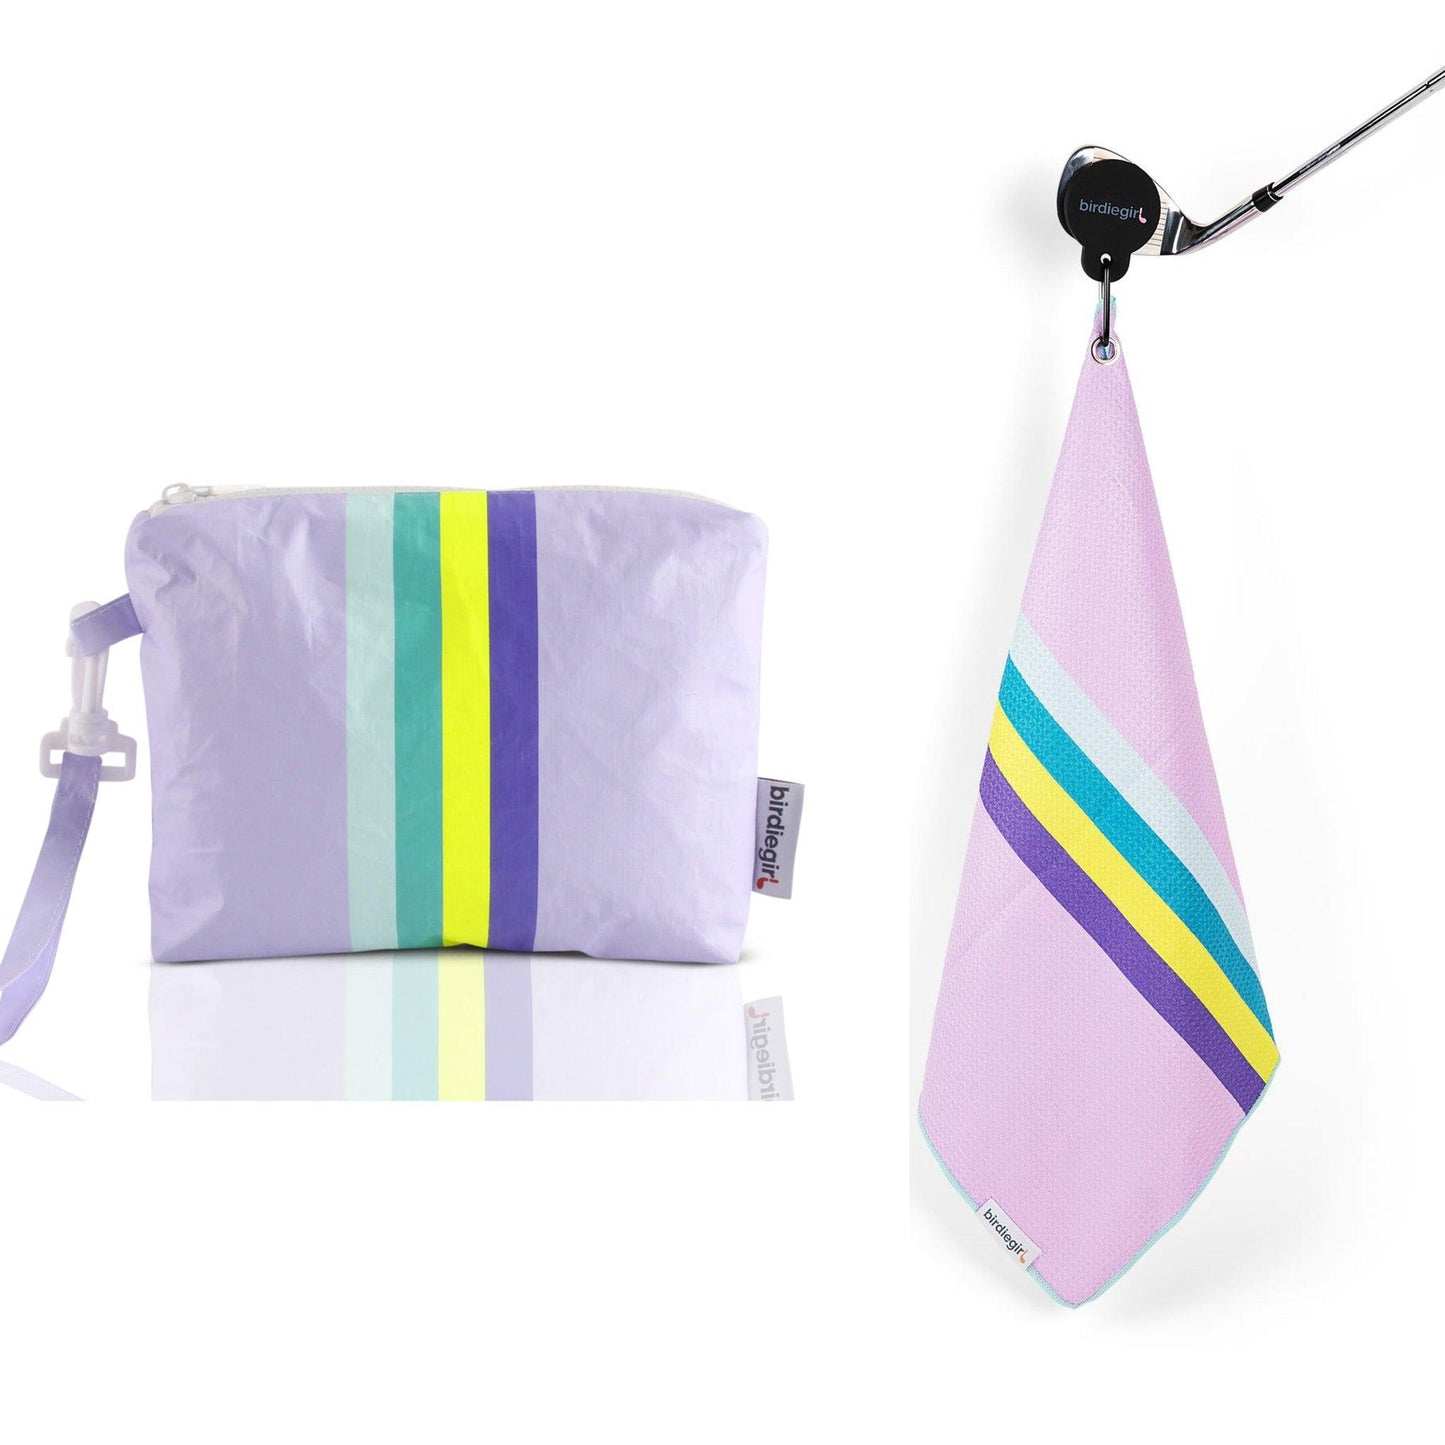 Set of 2: Lilac Dreams Magnetic Golf Towel and Golf Accessory Bag - Birdie Girl Golf